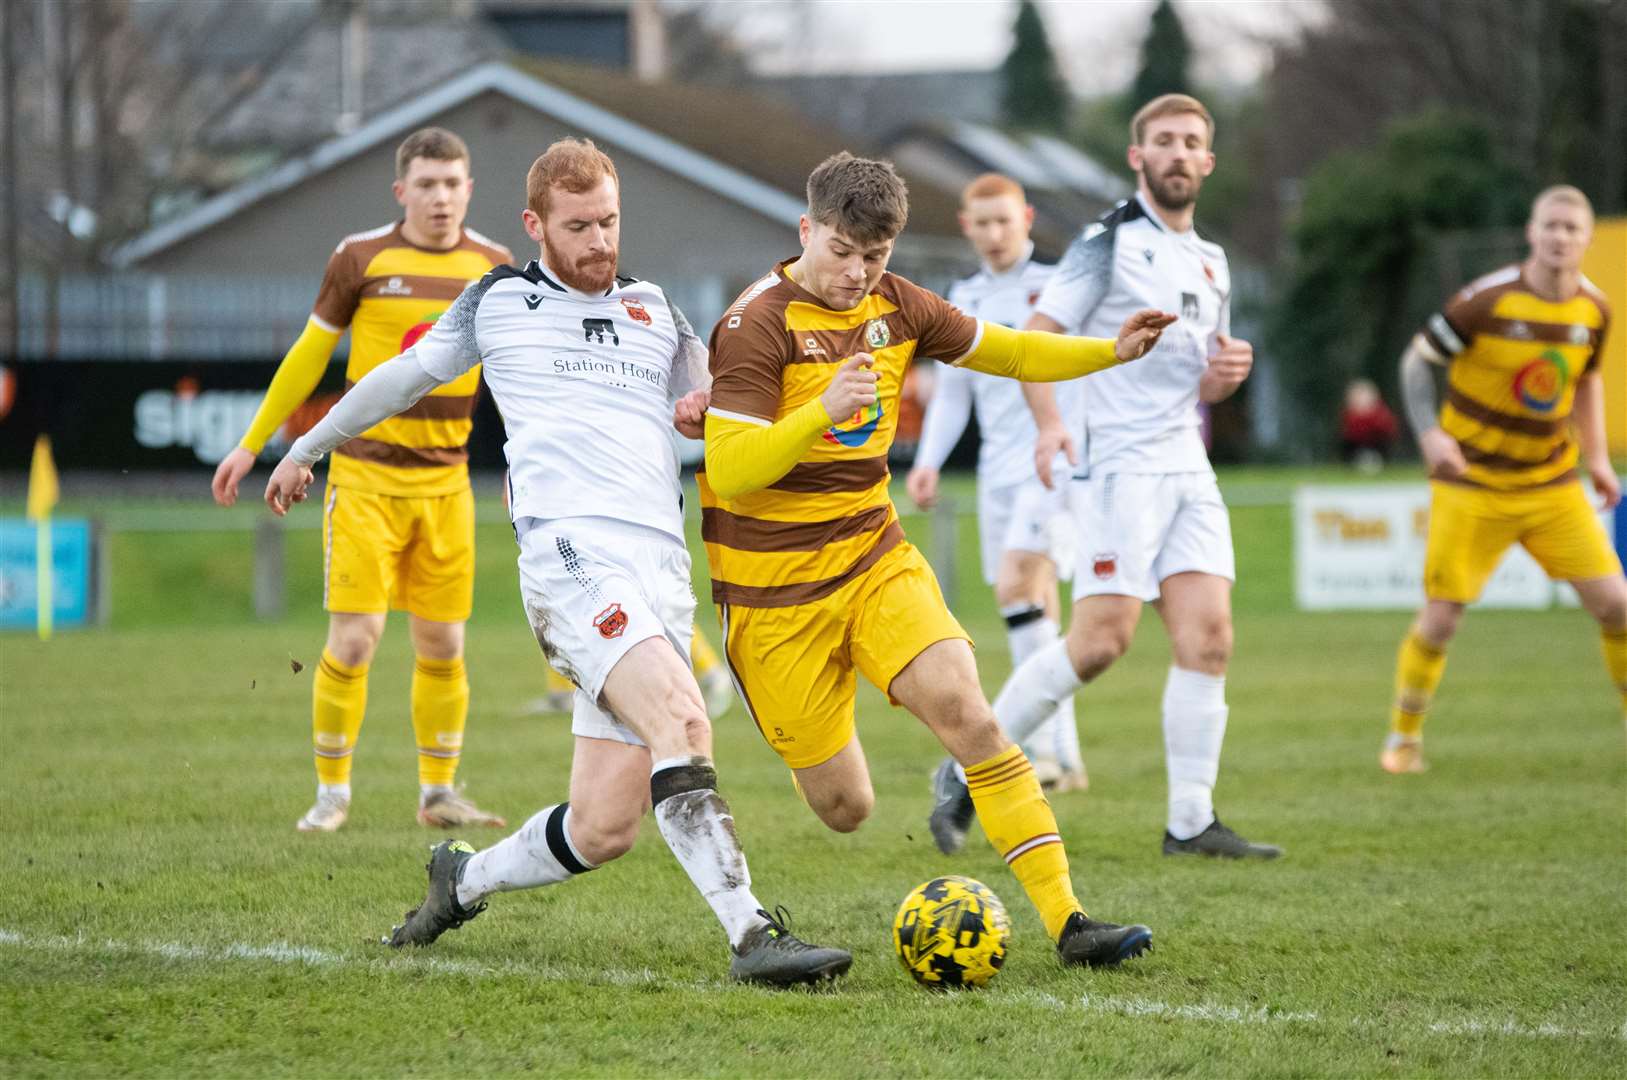 Rothes forward Greg Morrison gets a foot on the ball to stop Forres' Jack Grant advancing up the park. ..Forres Mechanics FC (0) vs Rothes FC (1) - Highland Football League 23/24 - Mosset Park, Forres 25/11/2023...Picture: Daniel Forsyth..